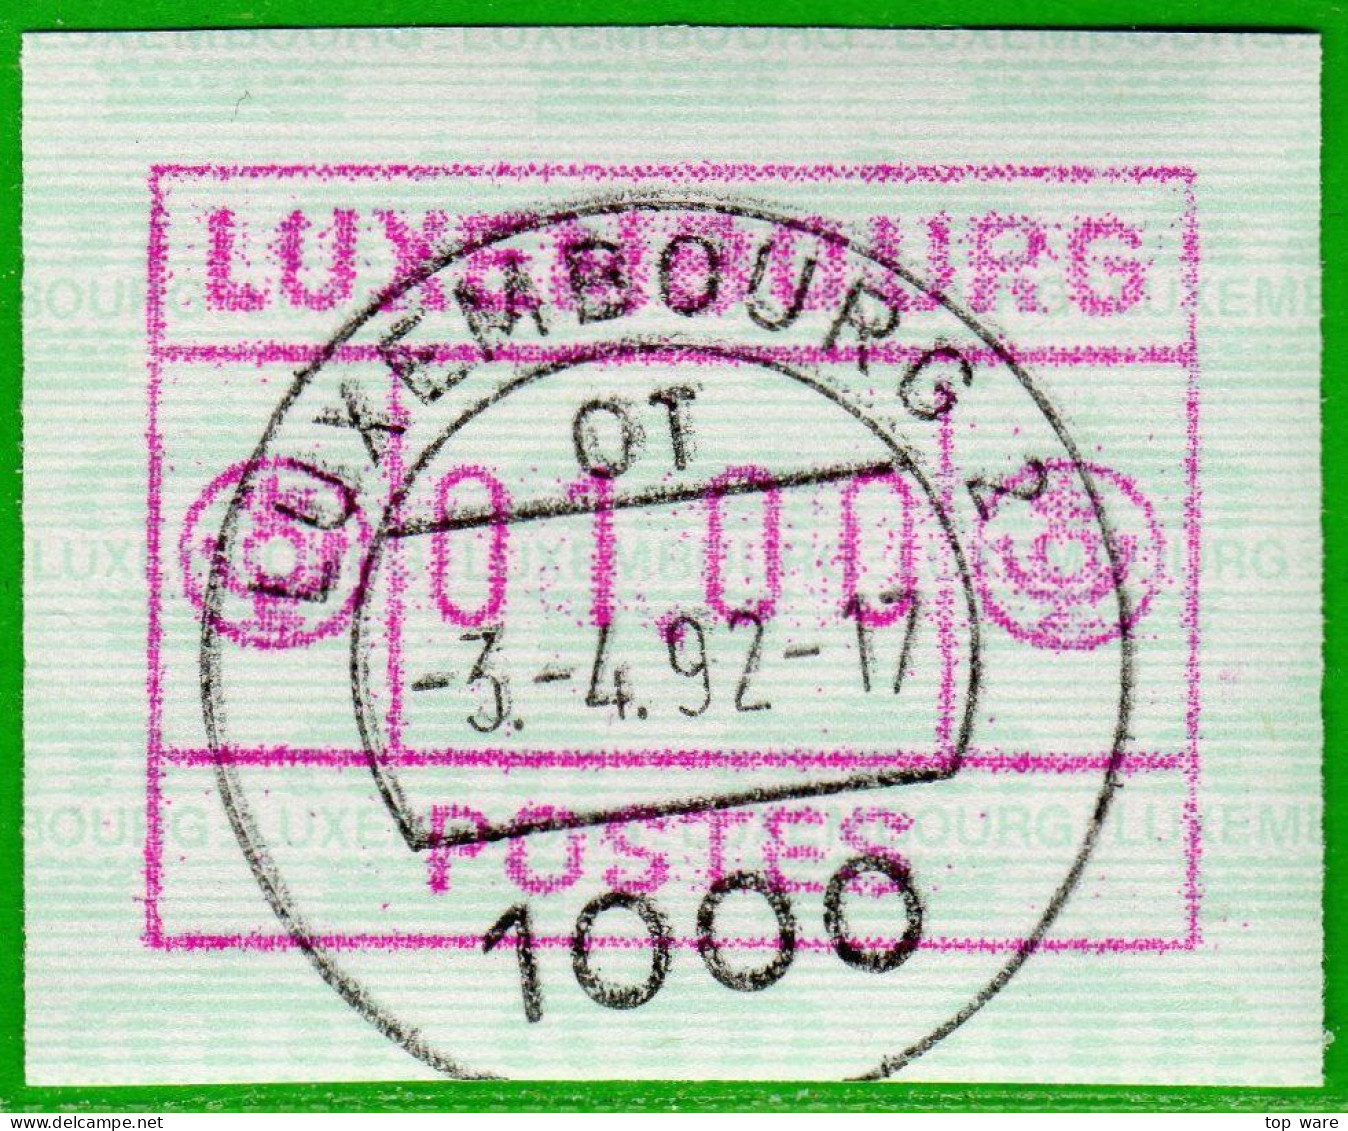 Luxemburg Luxembourg Timbres ATM  2 D Kleines Postes Rotlila / 01.00 Tages-O 3.4.1992 / Frama Automatenmarken - Frankeervignetten